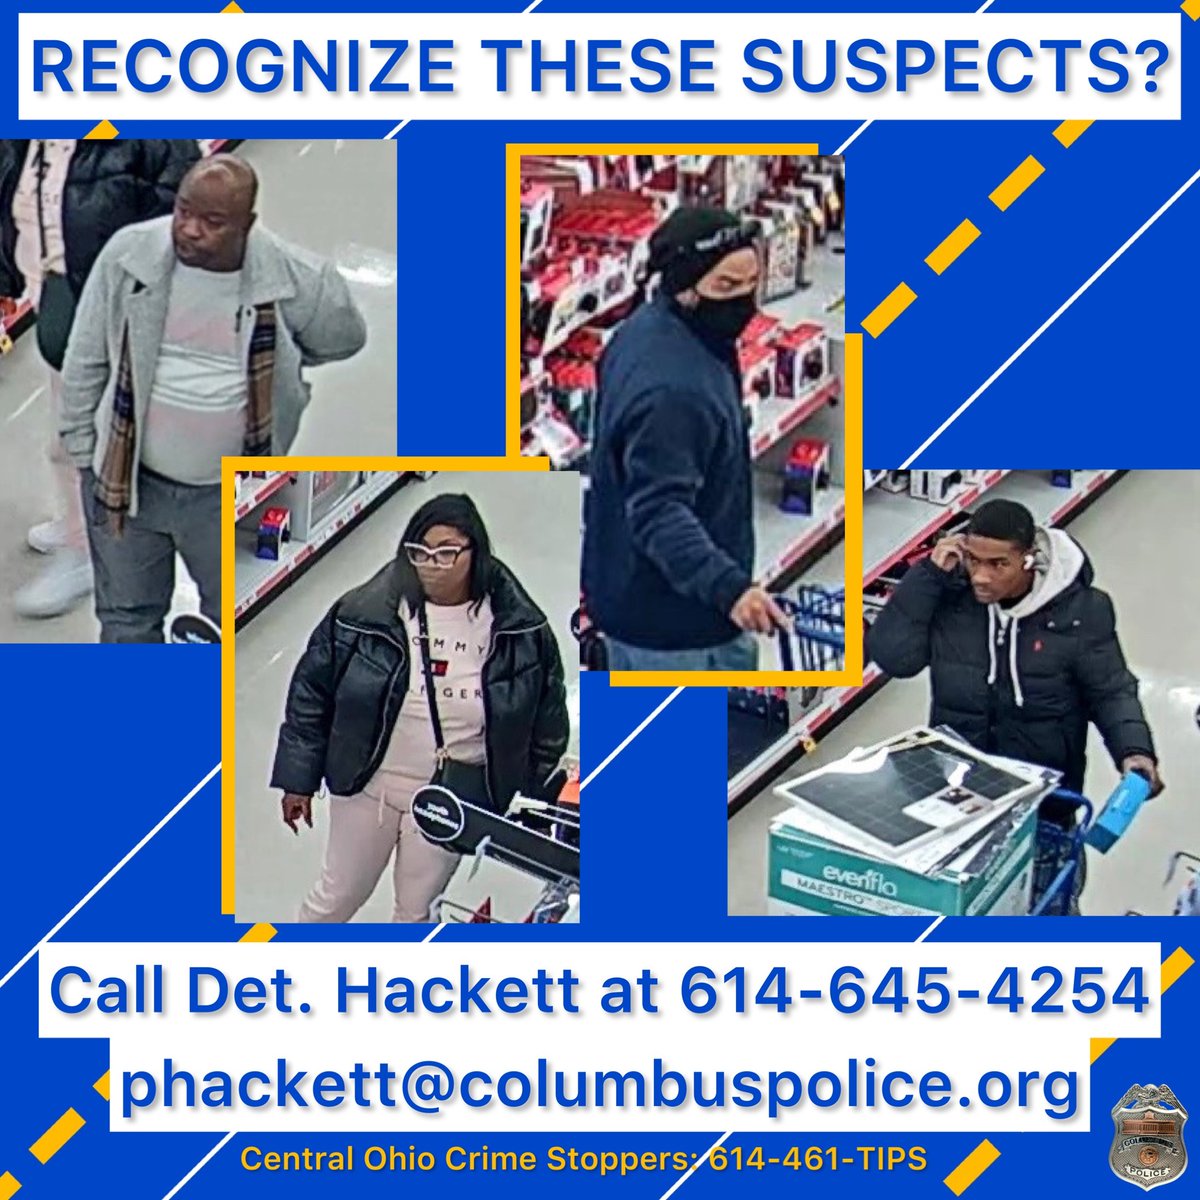 Detectives need help identifying four people who stole hundreds of dollars from a N. Hamilton Rd. retailer. The suspects were caught removing a car seat from its box then proceeded to use the same box to conceal merchandise. The price tag of the box was changed before checkout